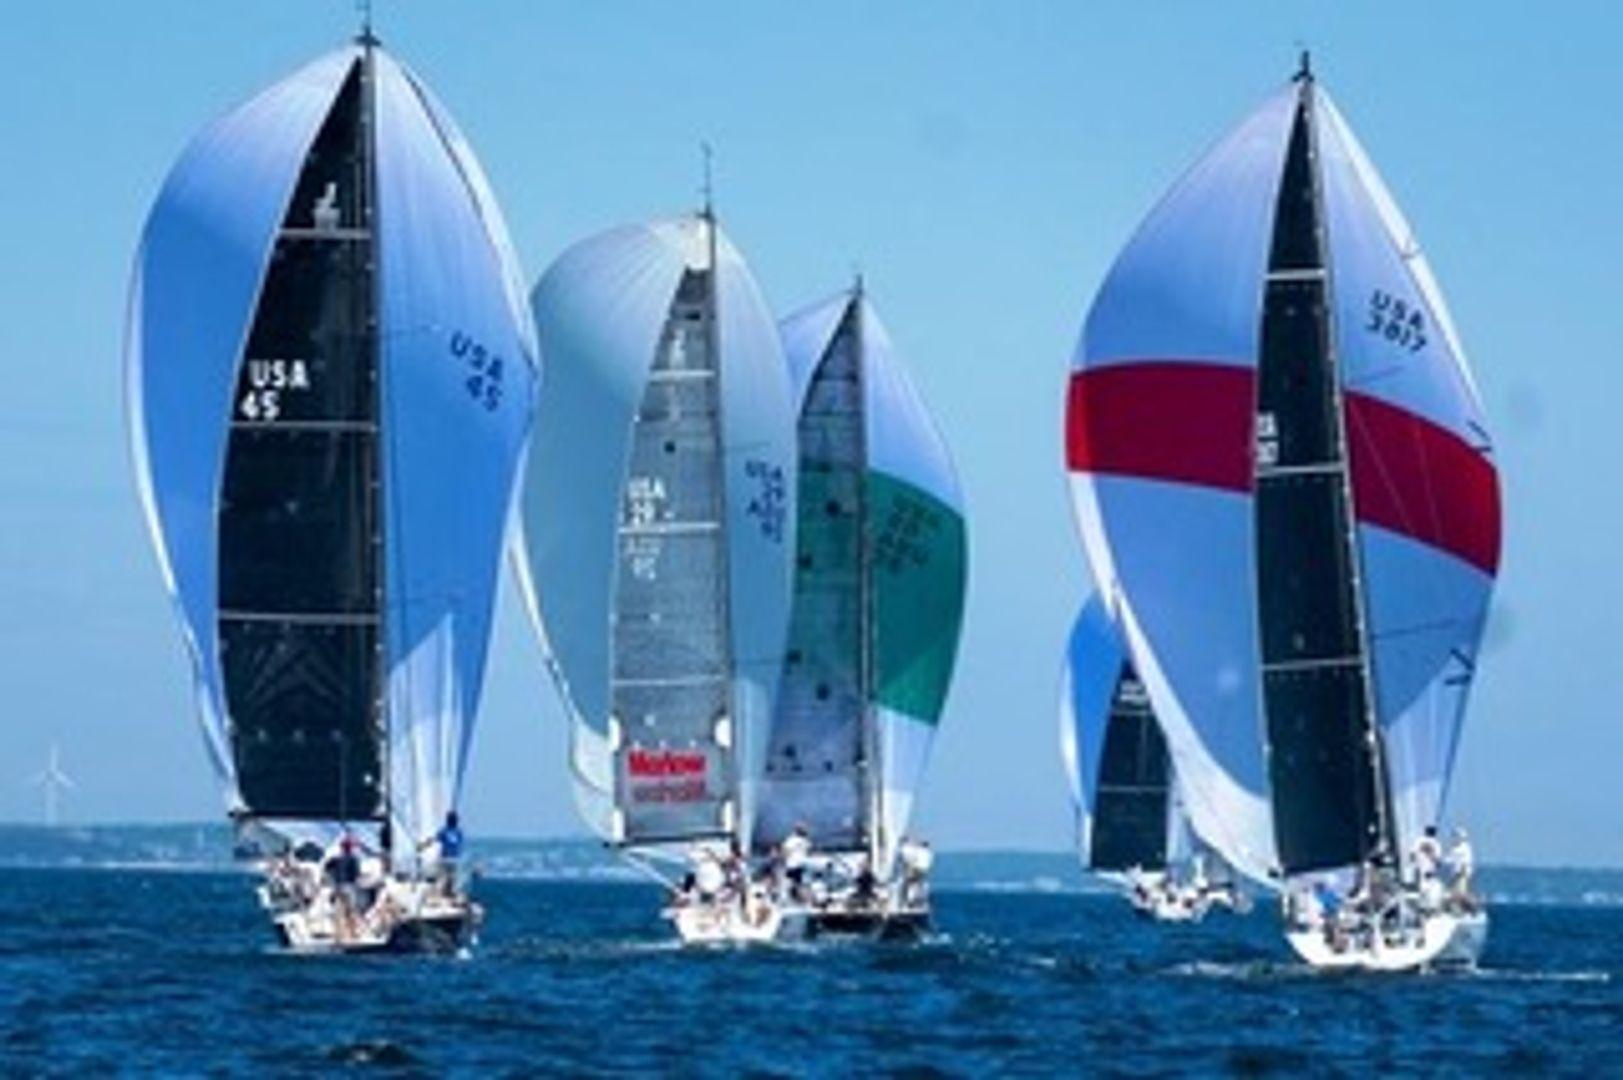 About 60-70% of the time we are day sailing, 20% cruising, and about 10-15% of the time racing- seen here (green) at the Ted Hood Regatta in 2020.
